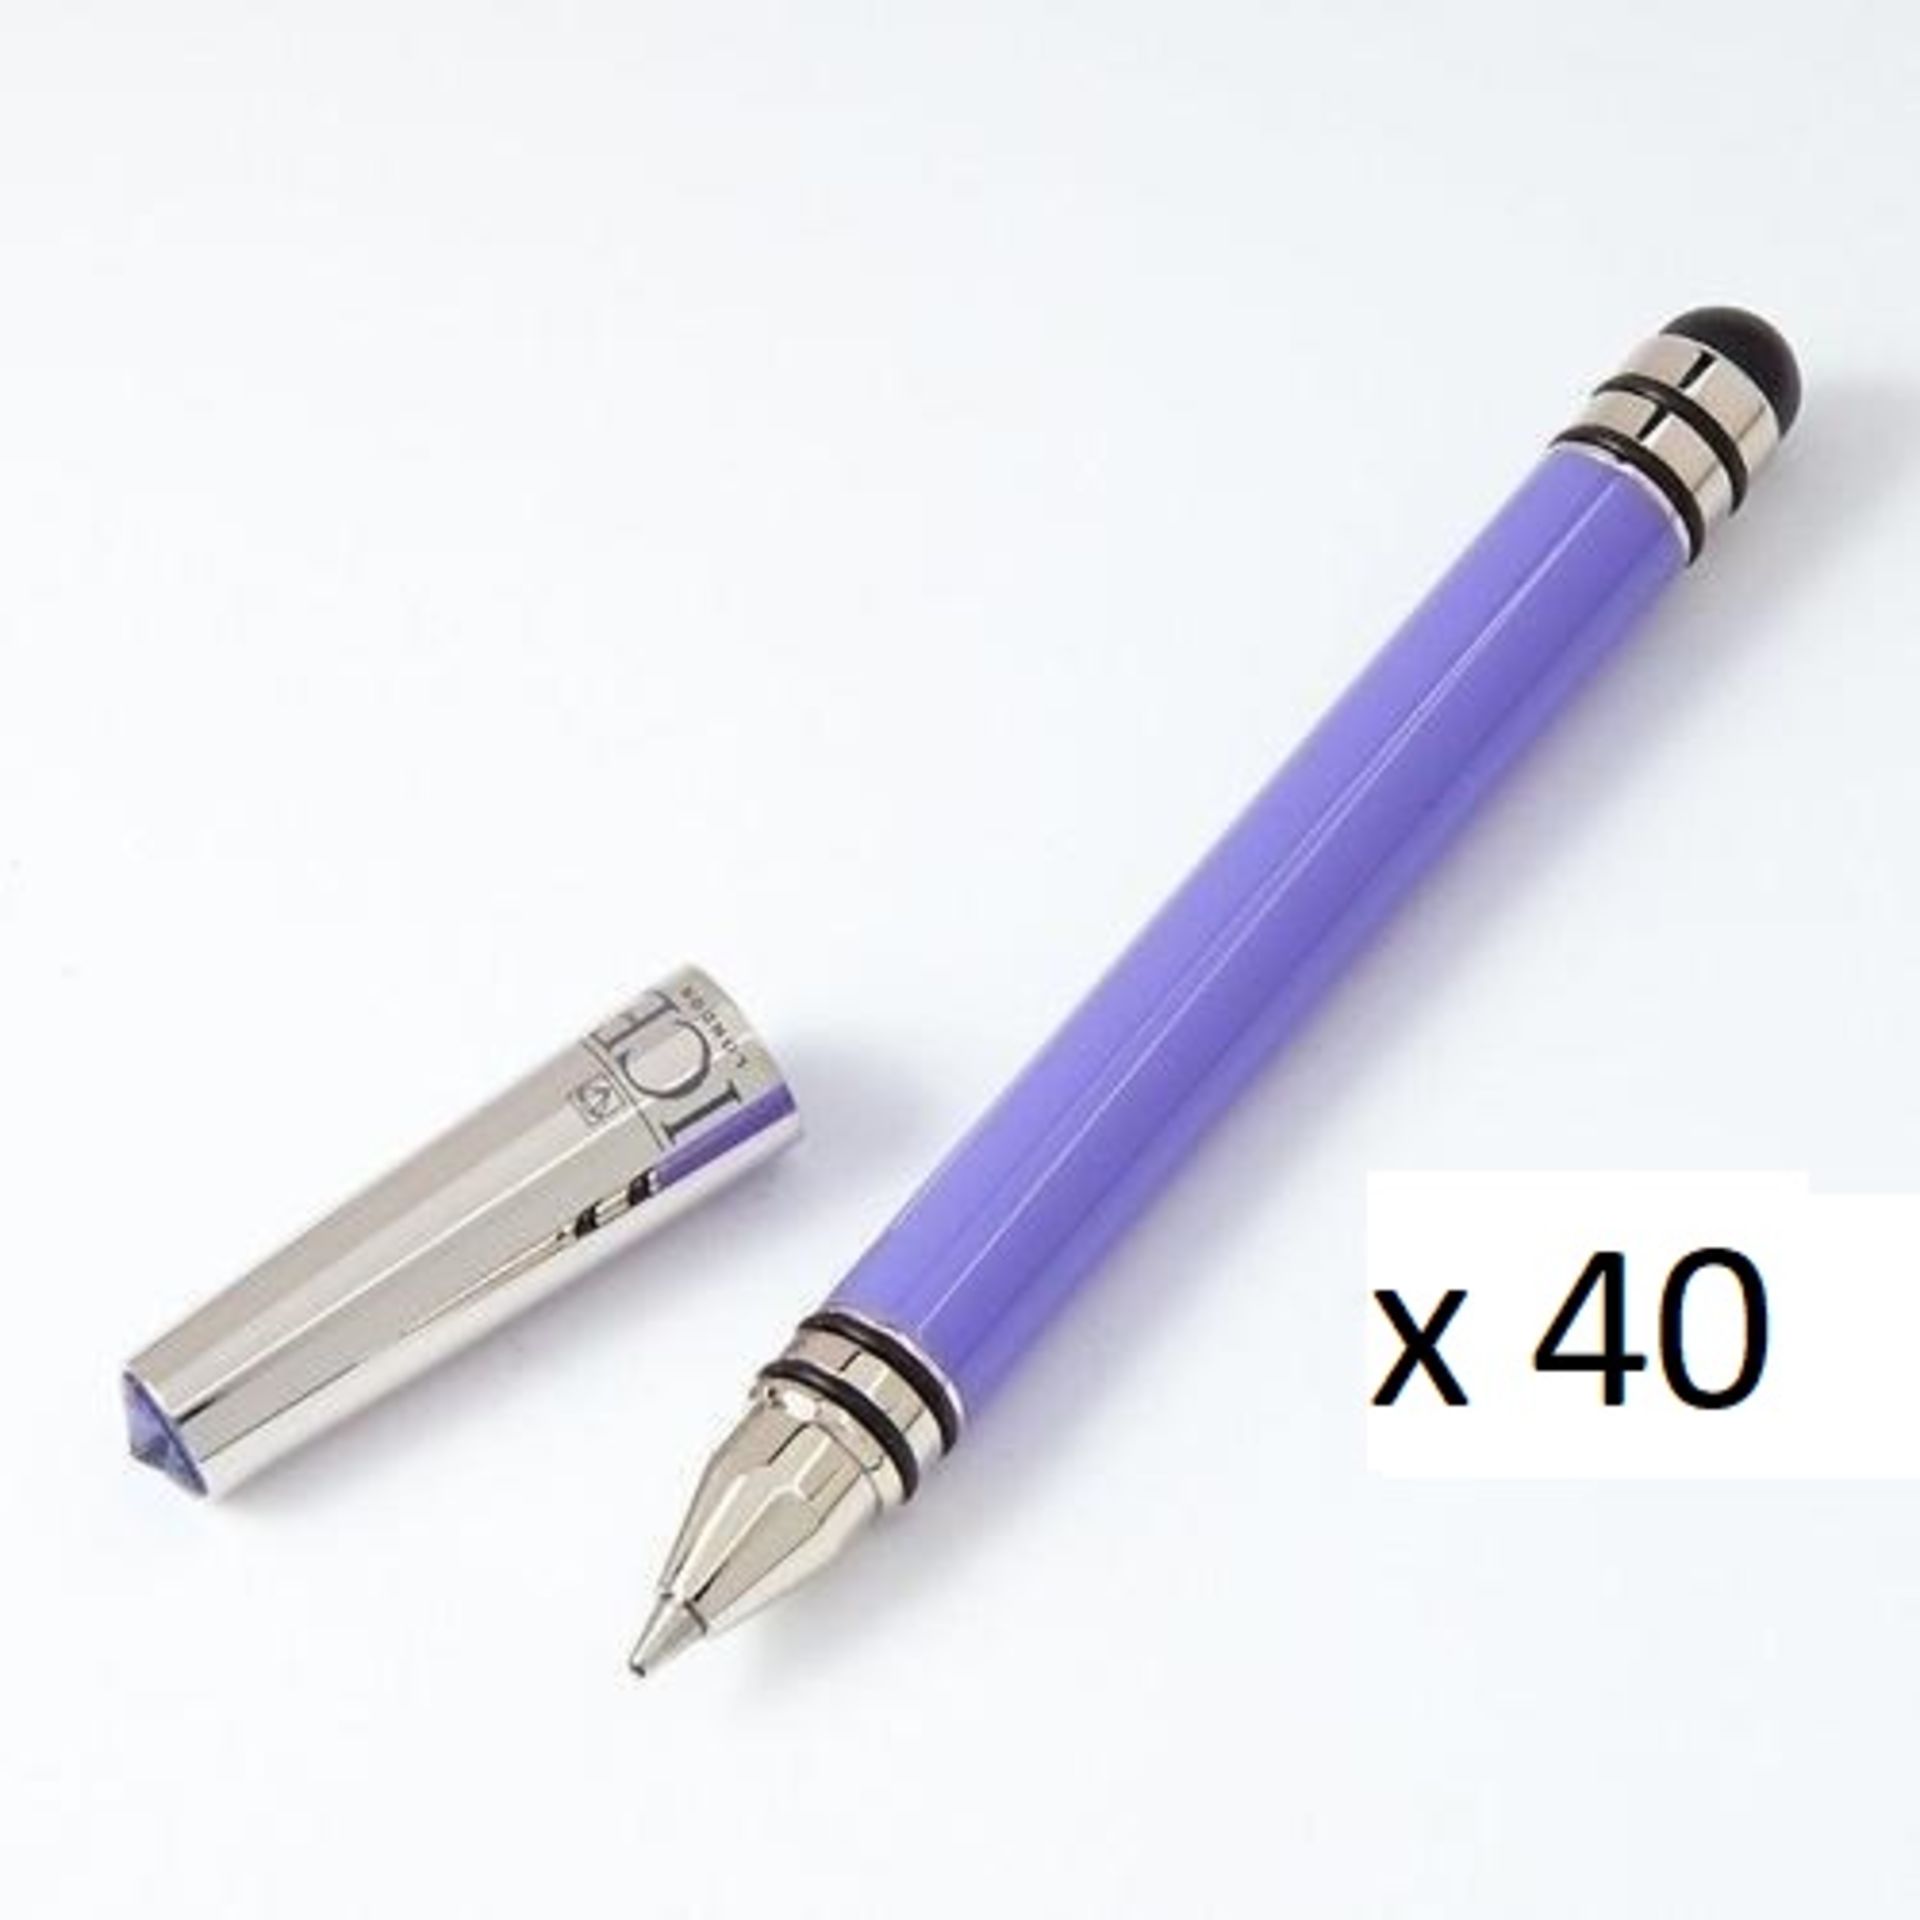 40 x ICE LONDON App Pen Duo - Touch Stylus And Ink Pen Combined - Colour: PURPLE - MADE WITH